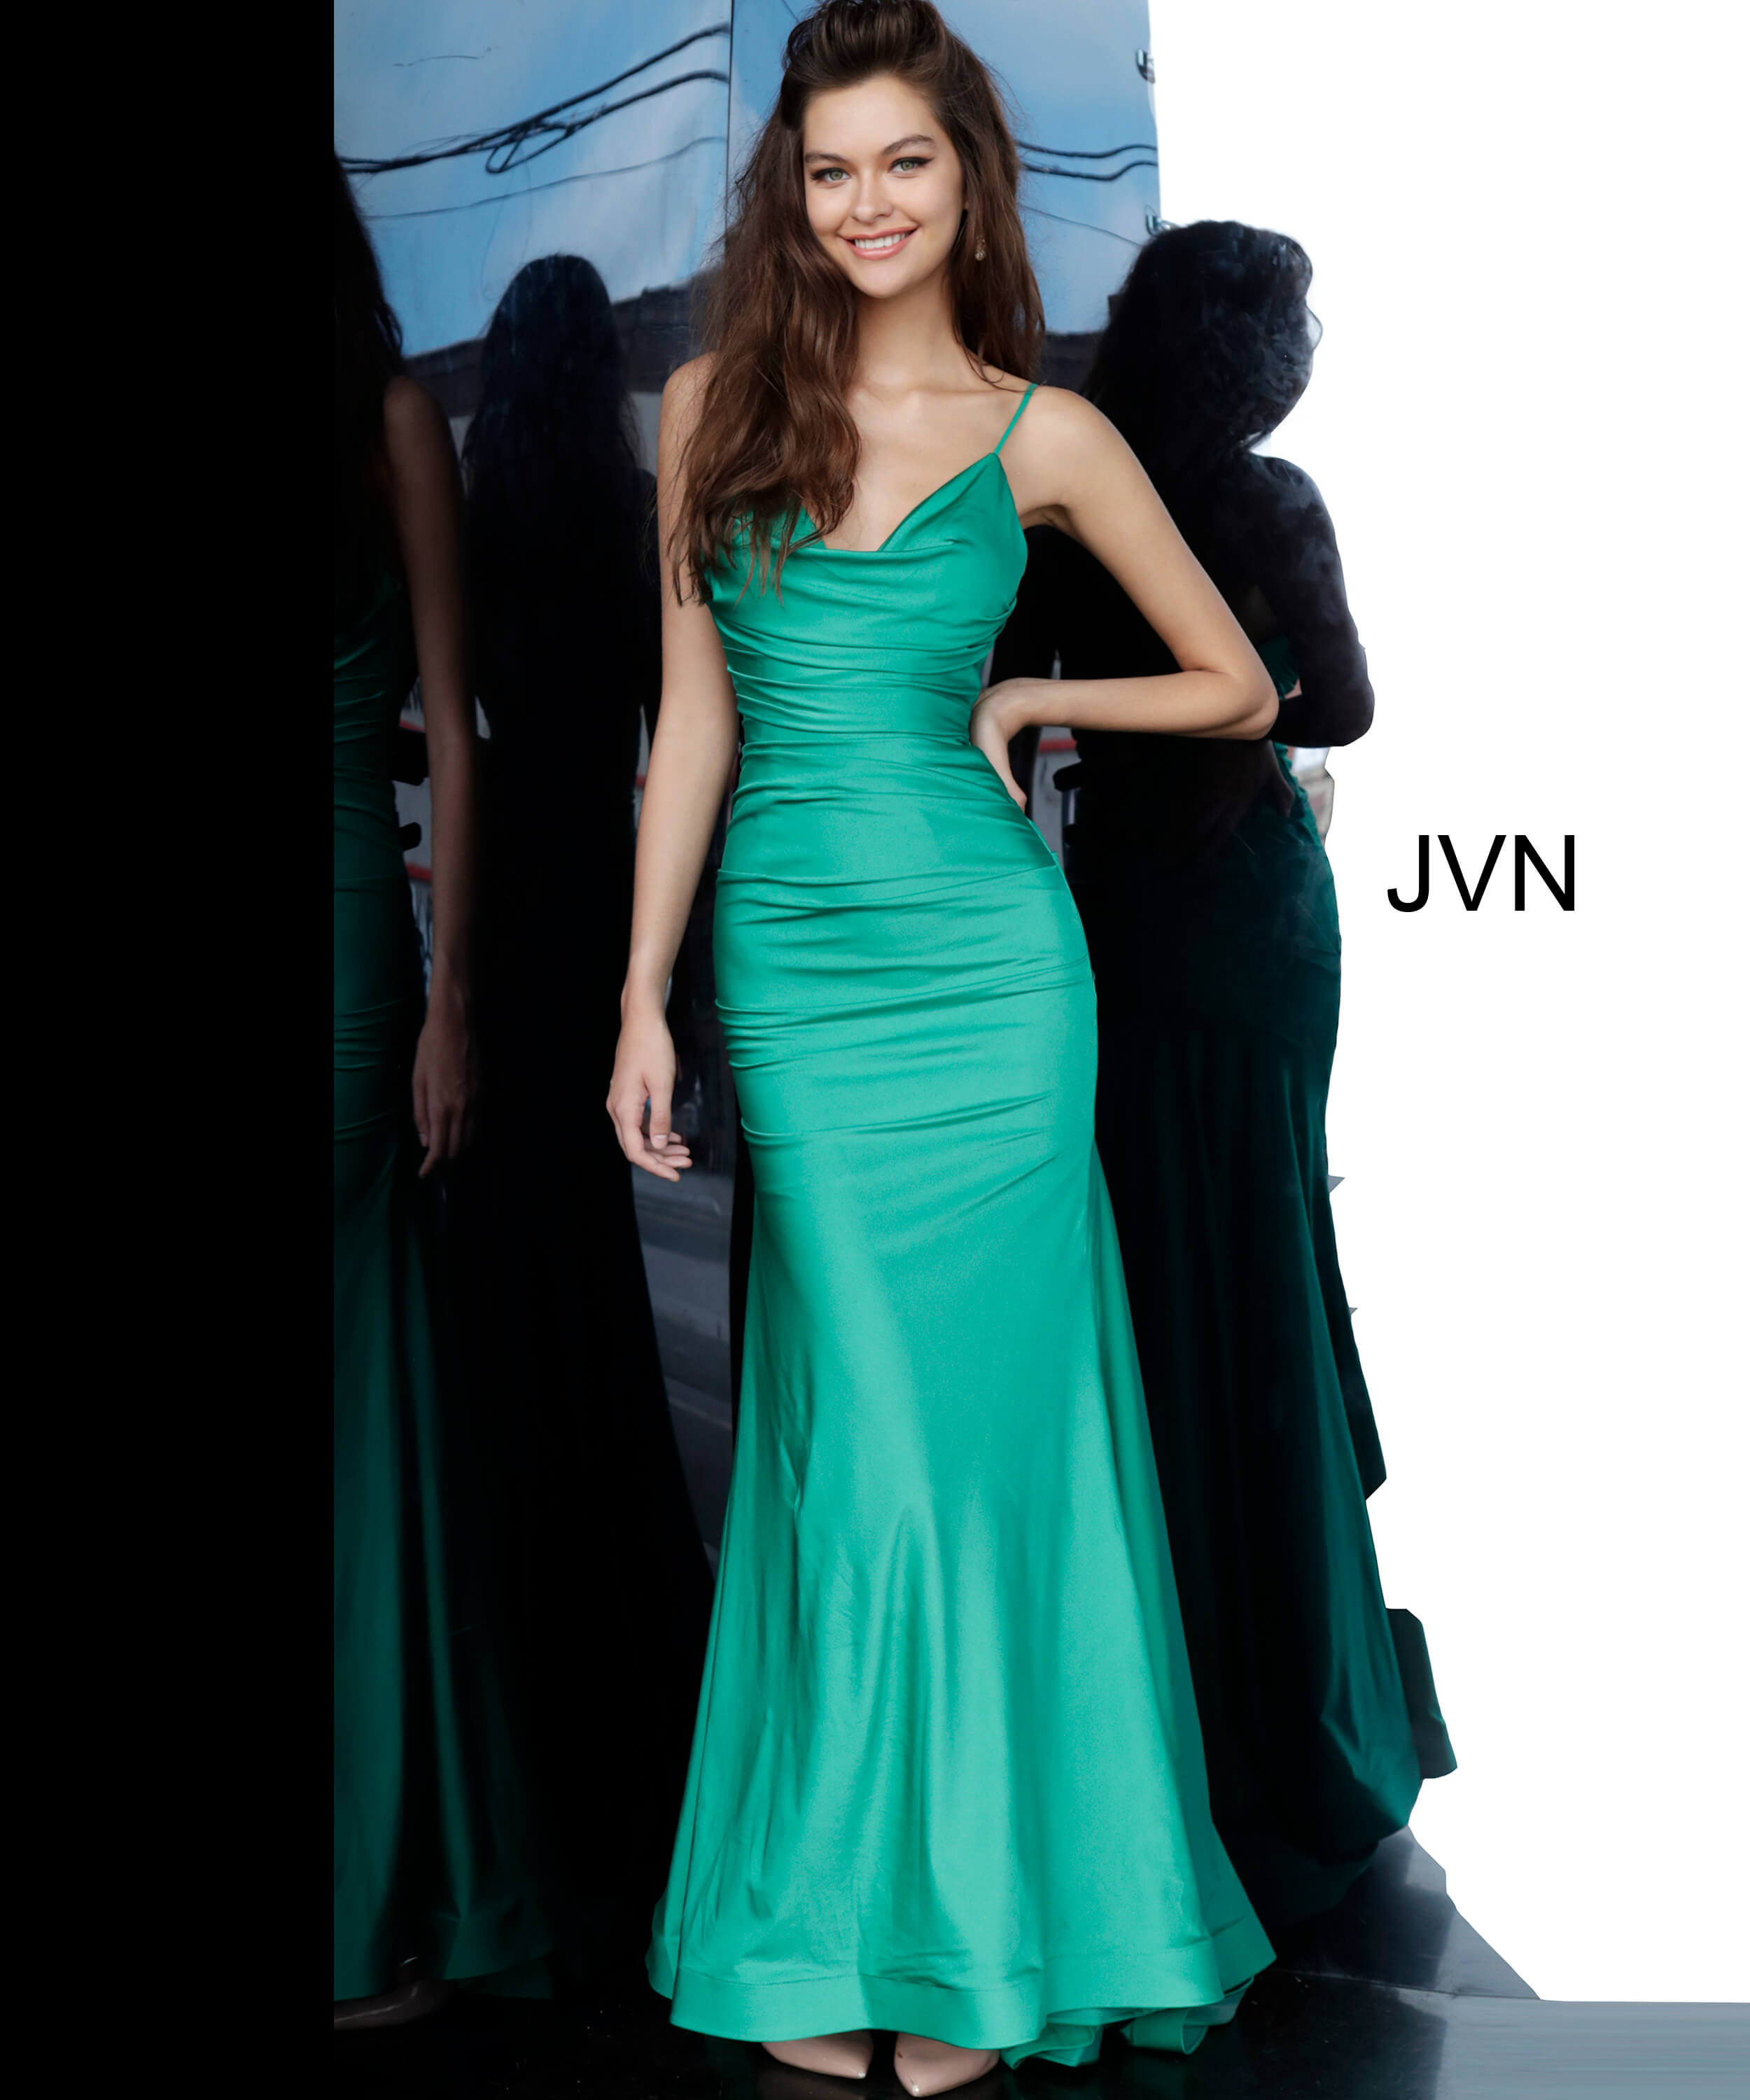 JVN00968 Dress Emerald green ruched bodice fitted prom dress